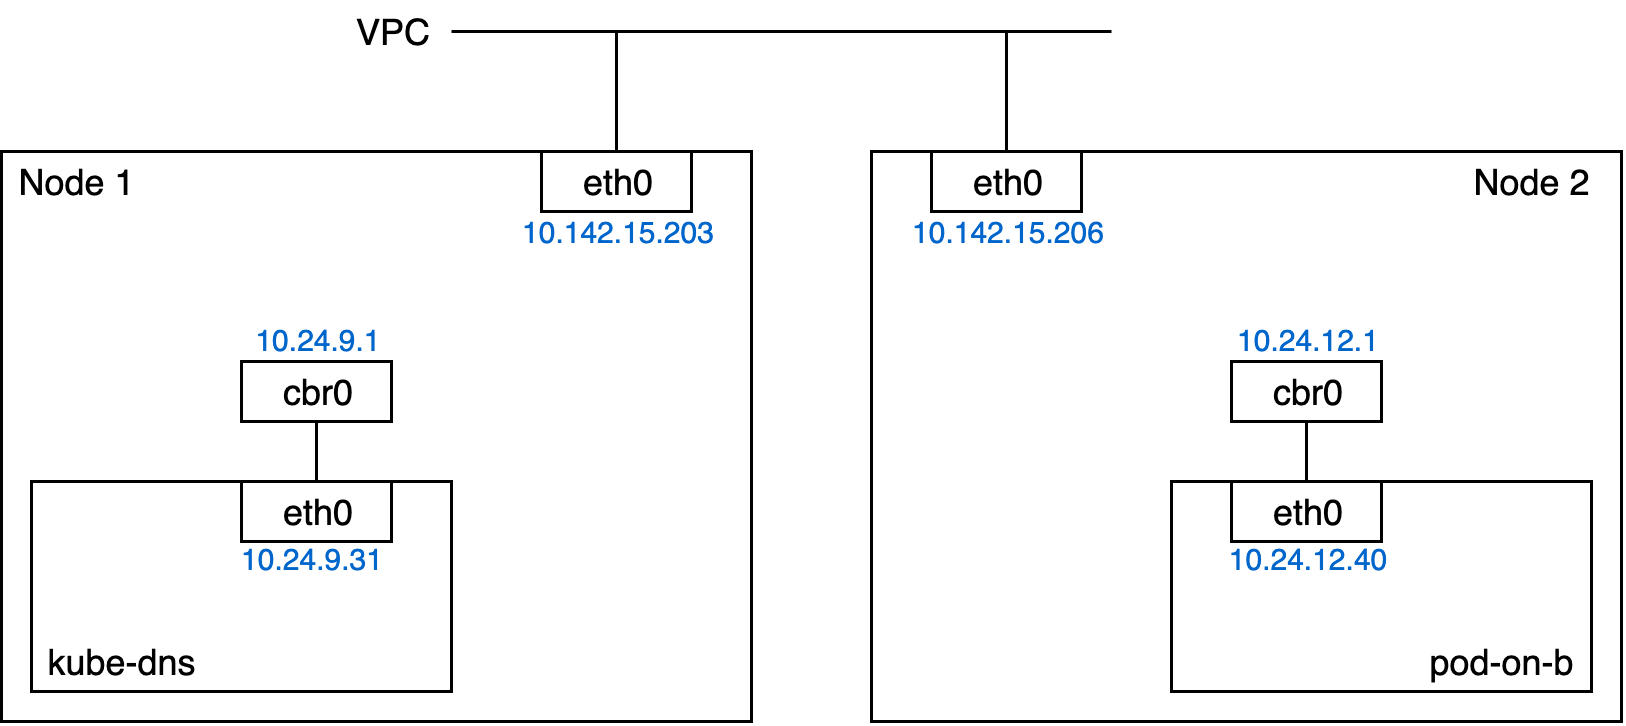 Network diagram of the Kubernetes cluster with two nodes and two pods and with IPs displayed